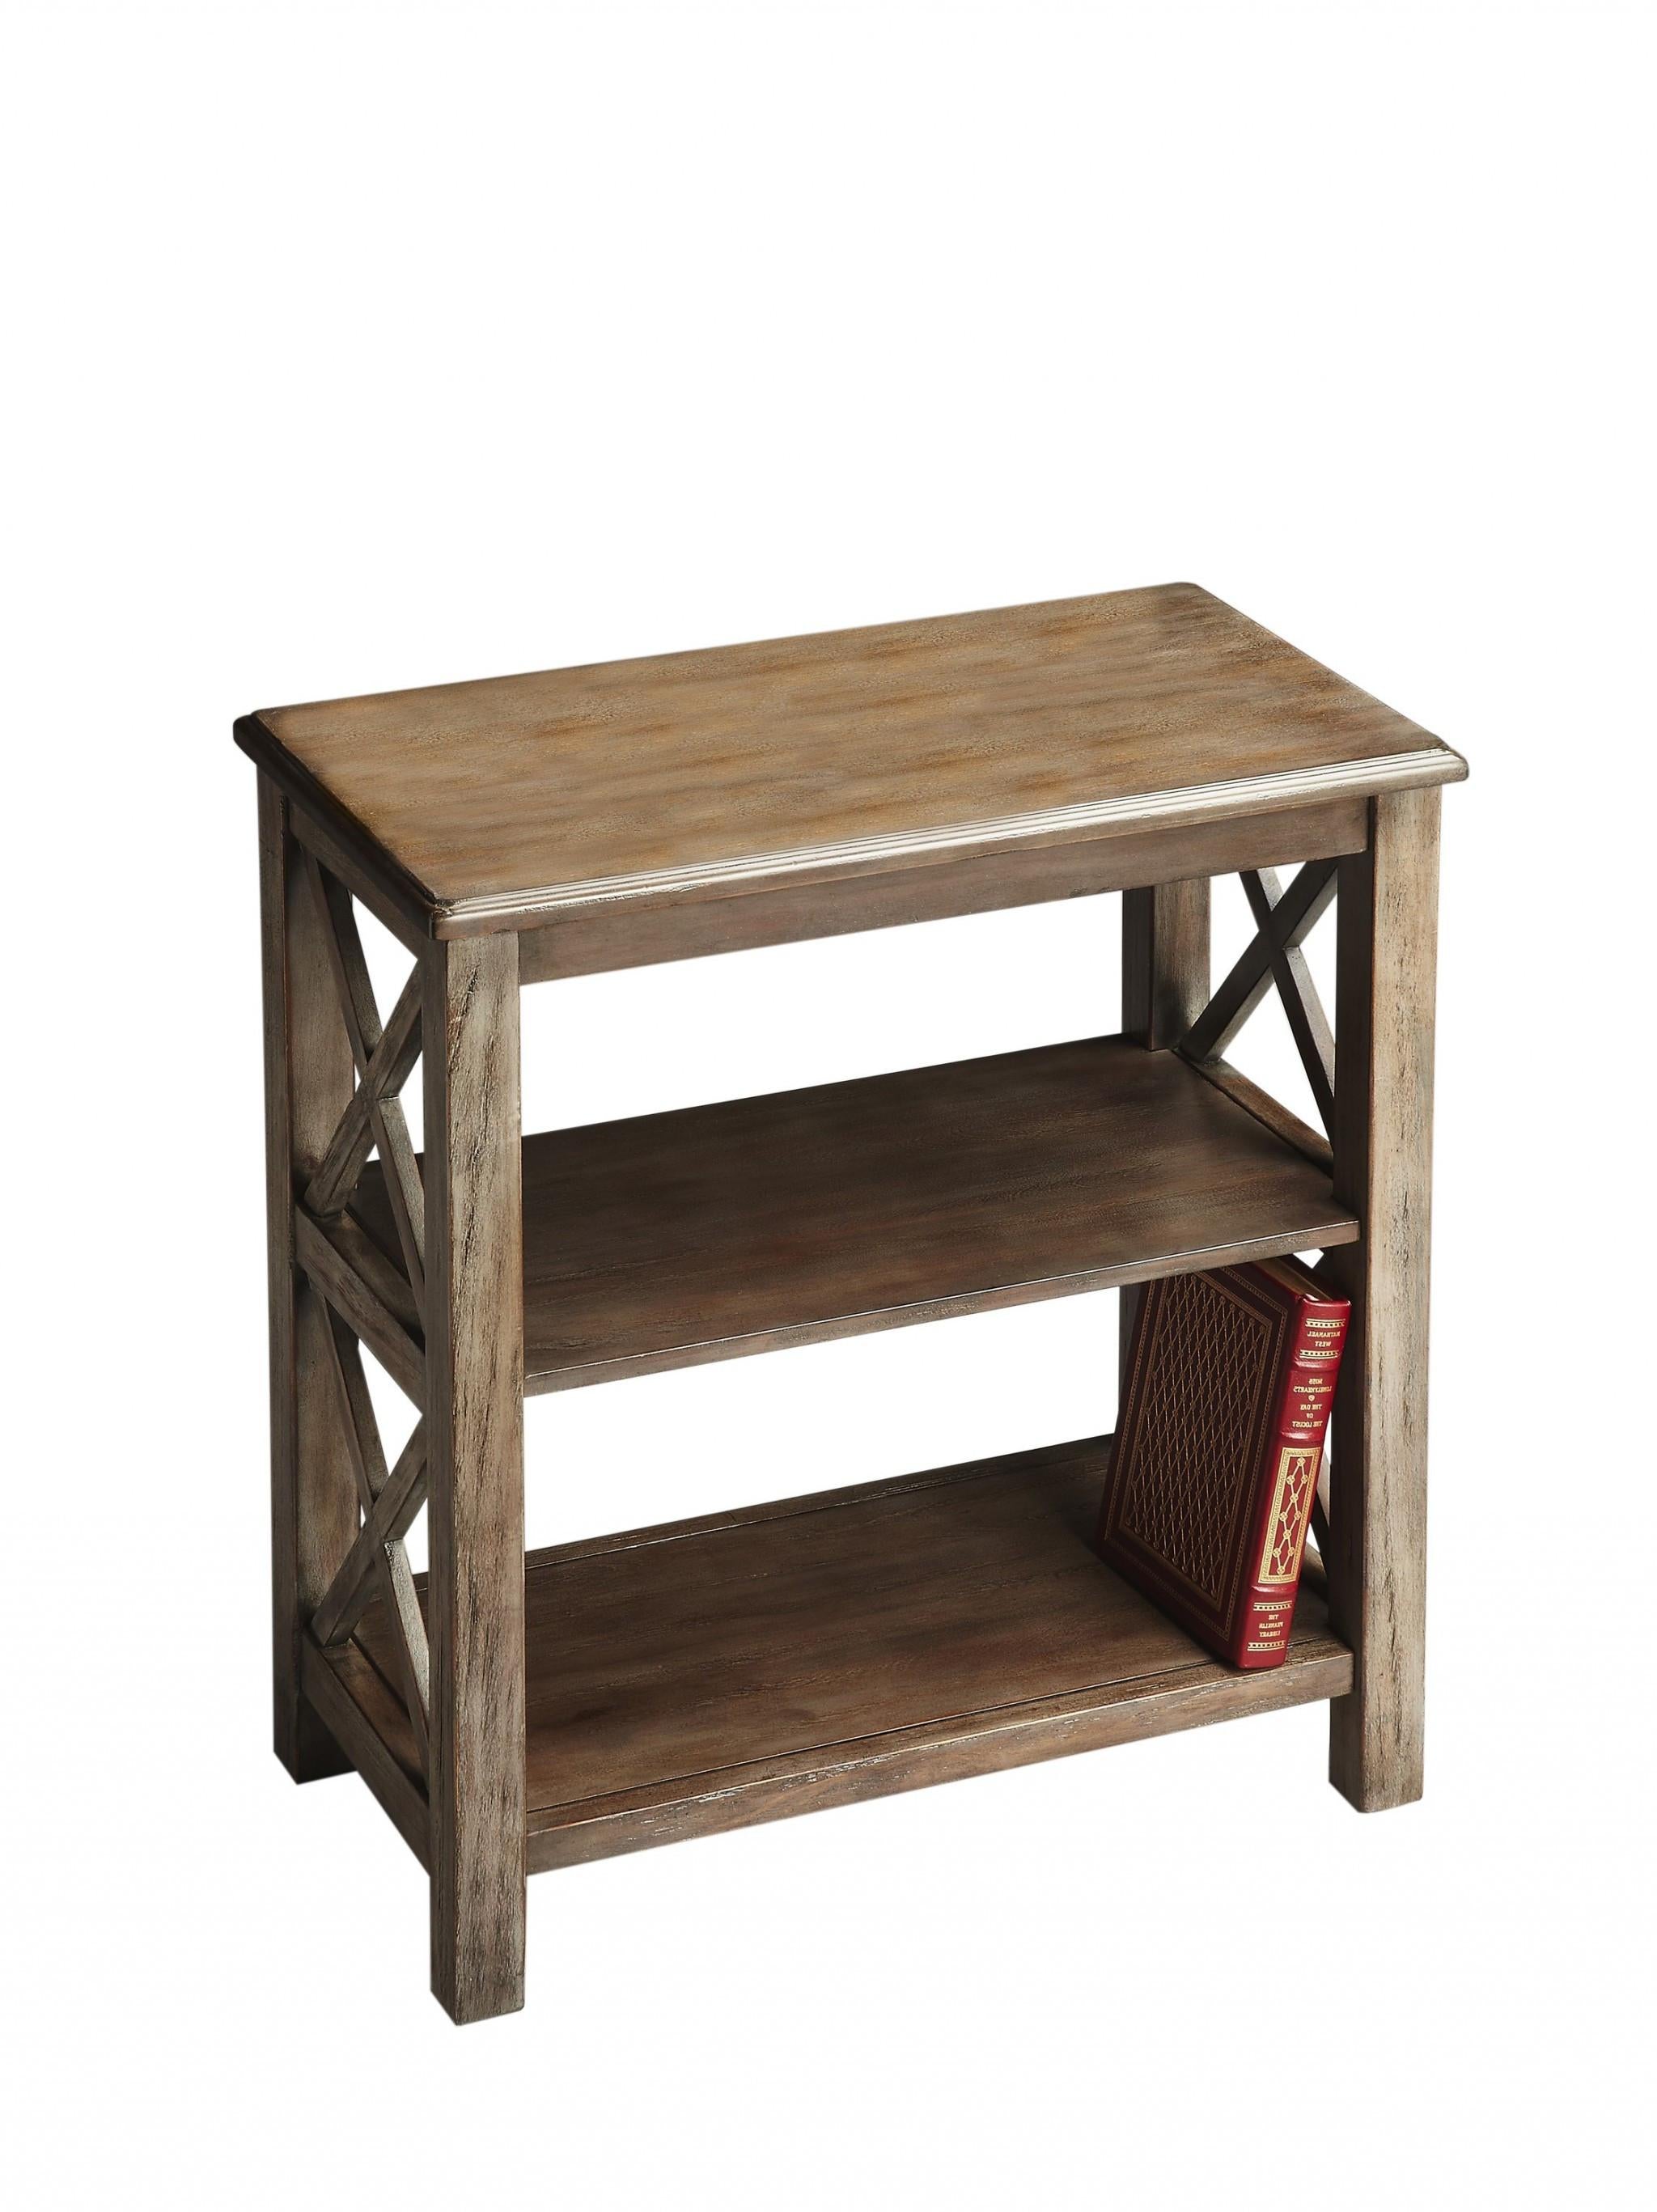 Vance Dusty Trail Bookcase